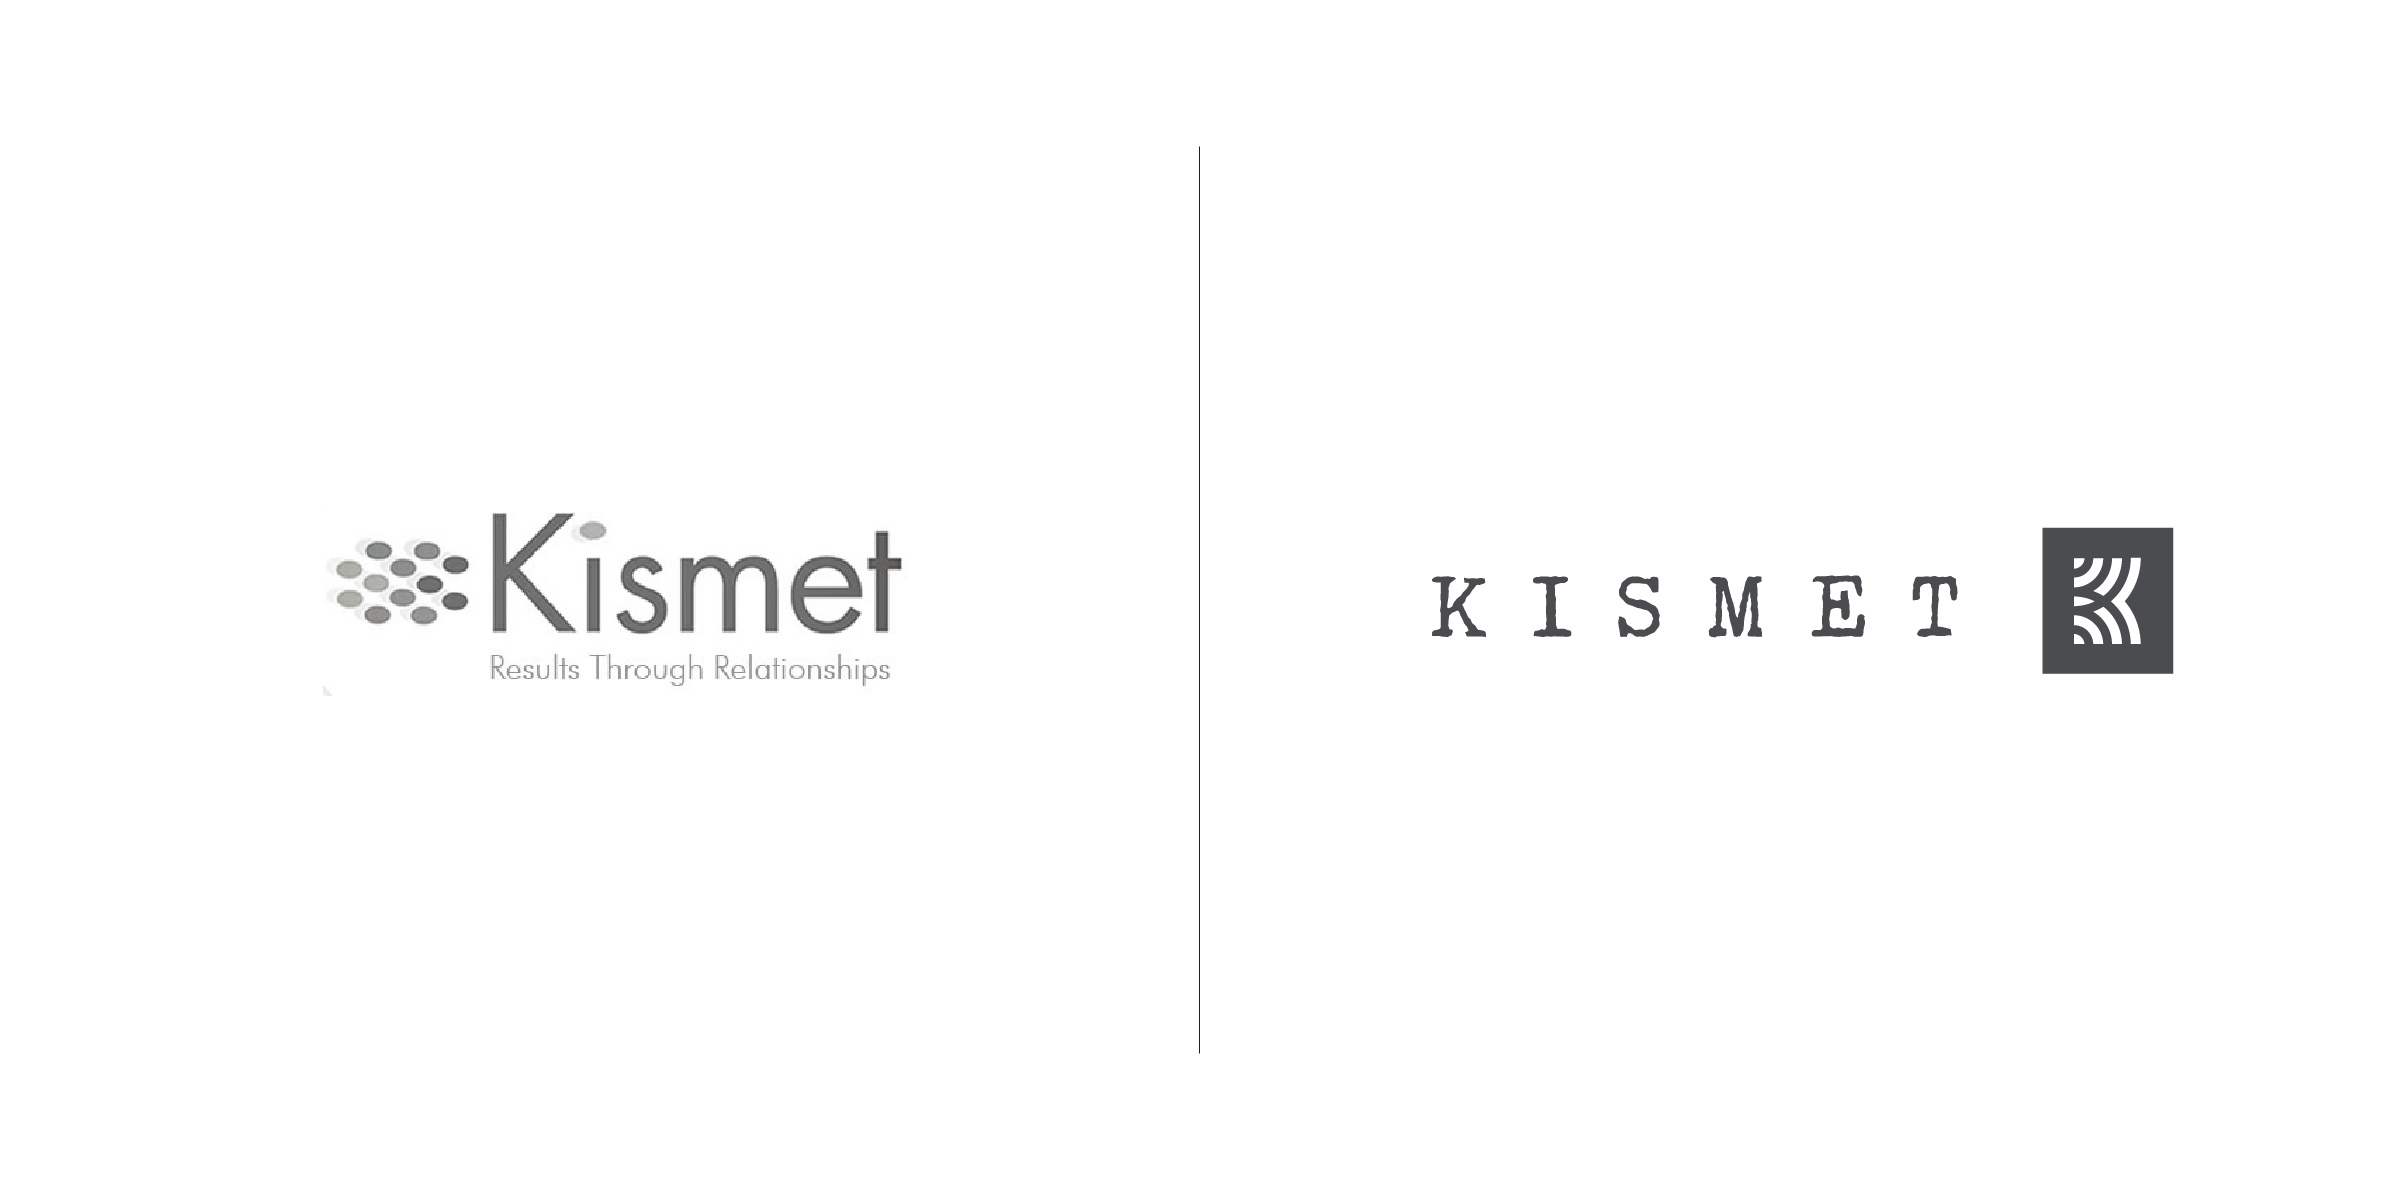  The client —   Kismet is a consulting company founded to help people realize their fate so they can live, work and lead with purpose.  The goal — Kismet's logo needed to match the same level of sophistication to their impressive clientele while also